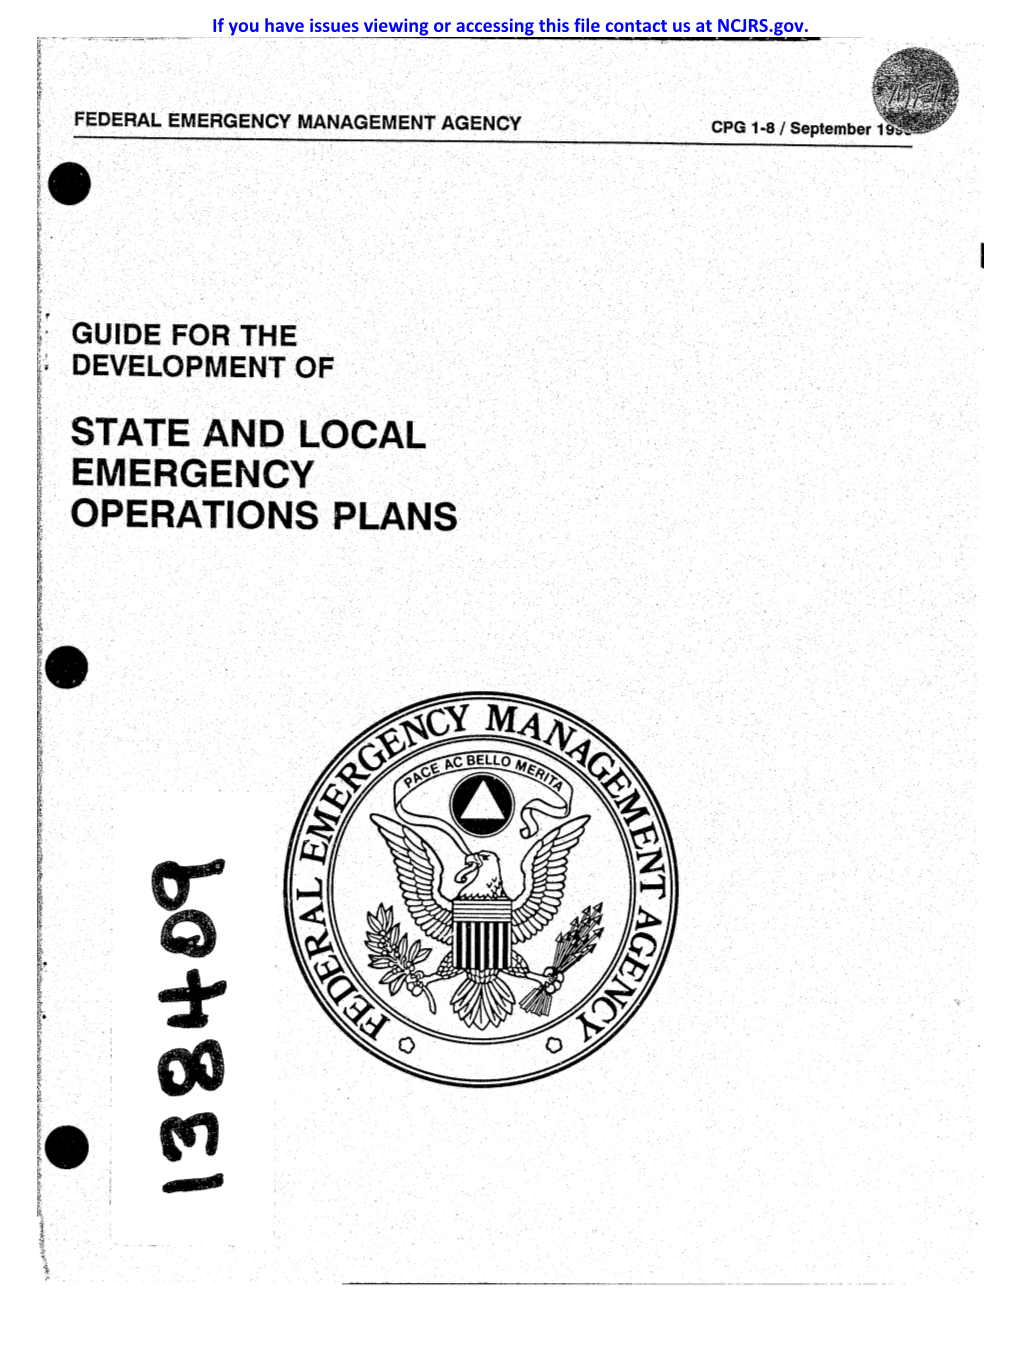 Guide for the Development of State and Local Emergency Operations Plans